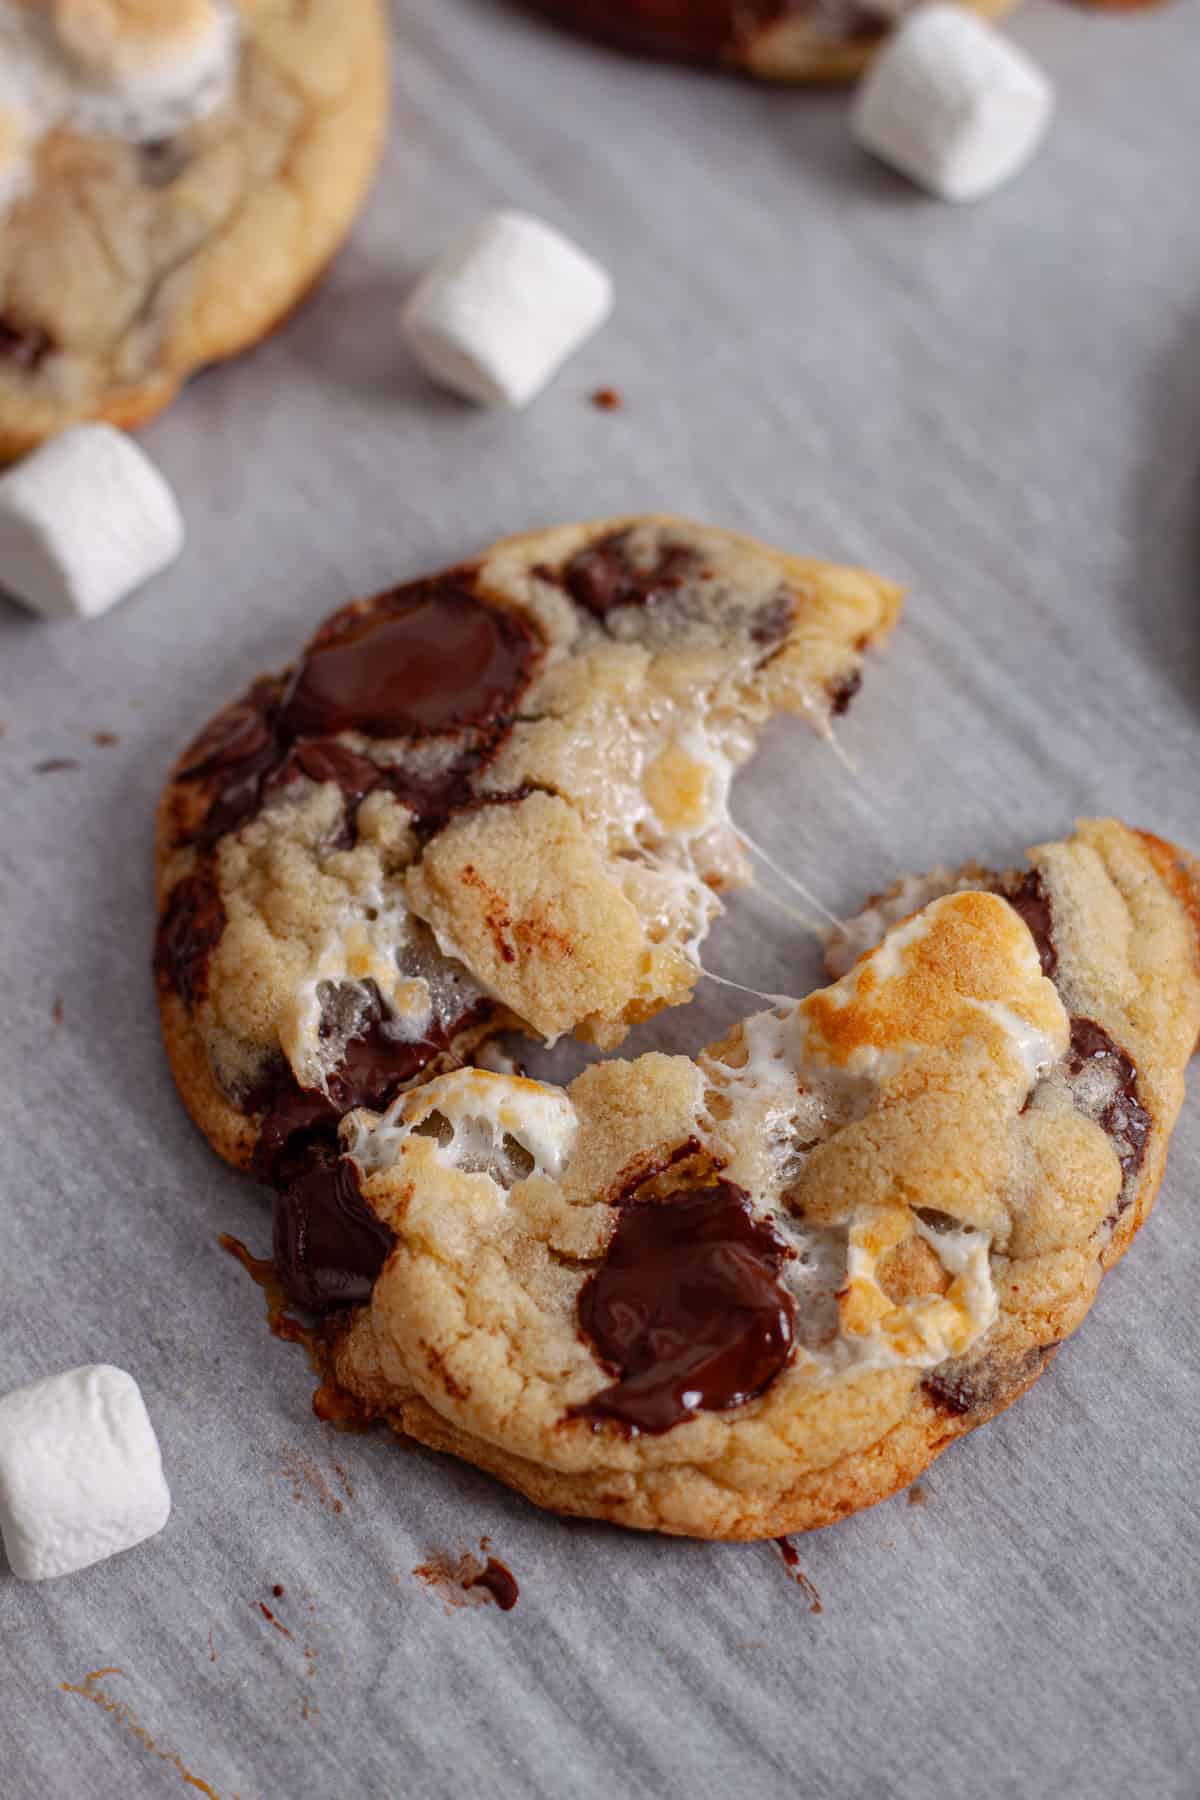 A chocolate chip and marshmallow cookie pulled apart on a baking sheet.